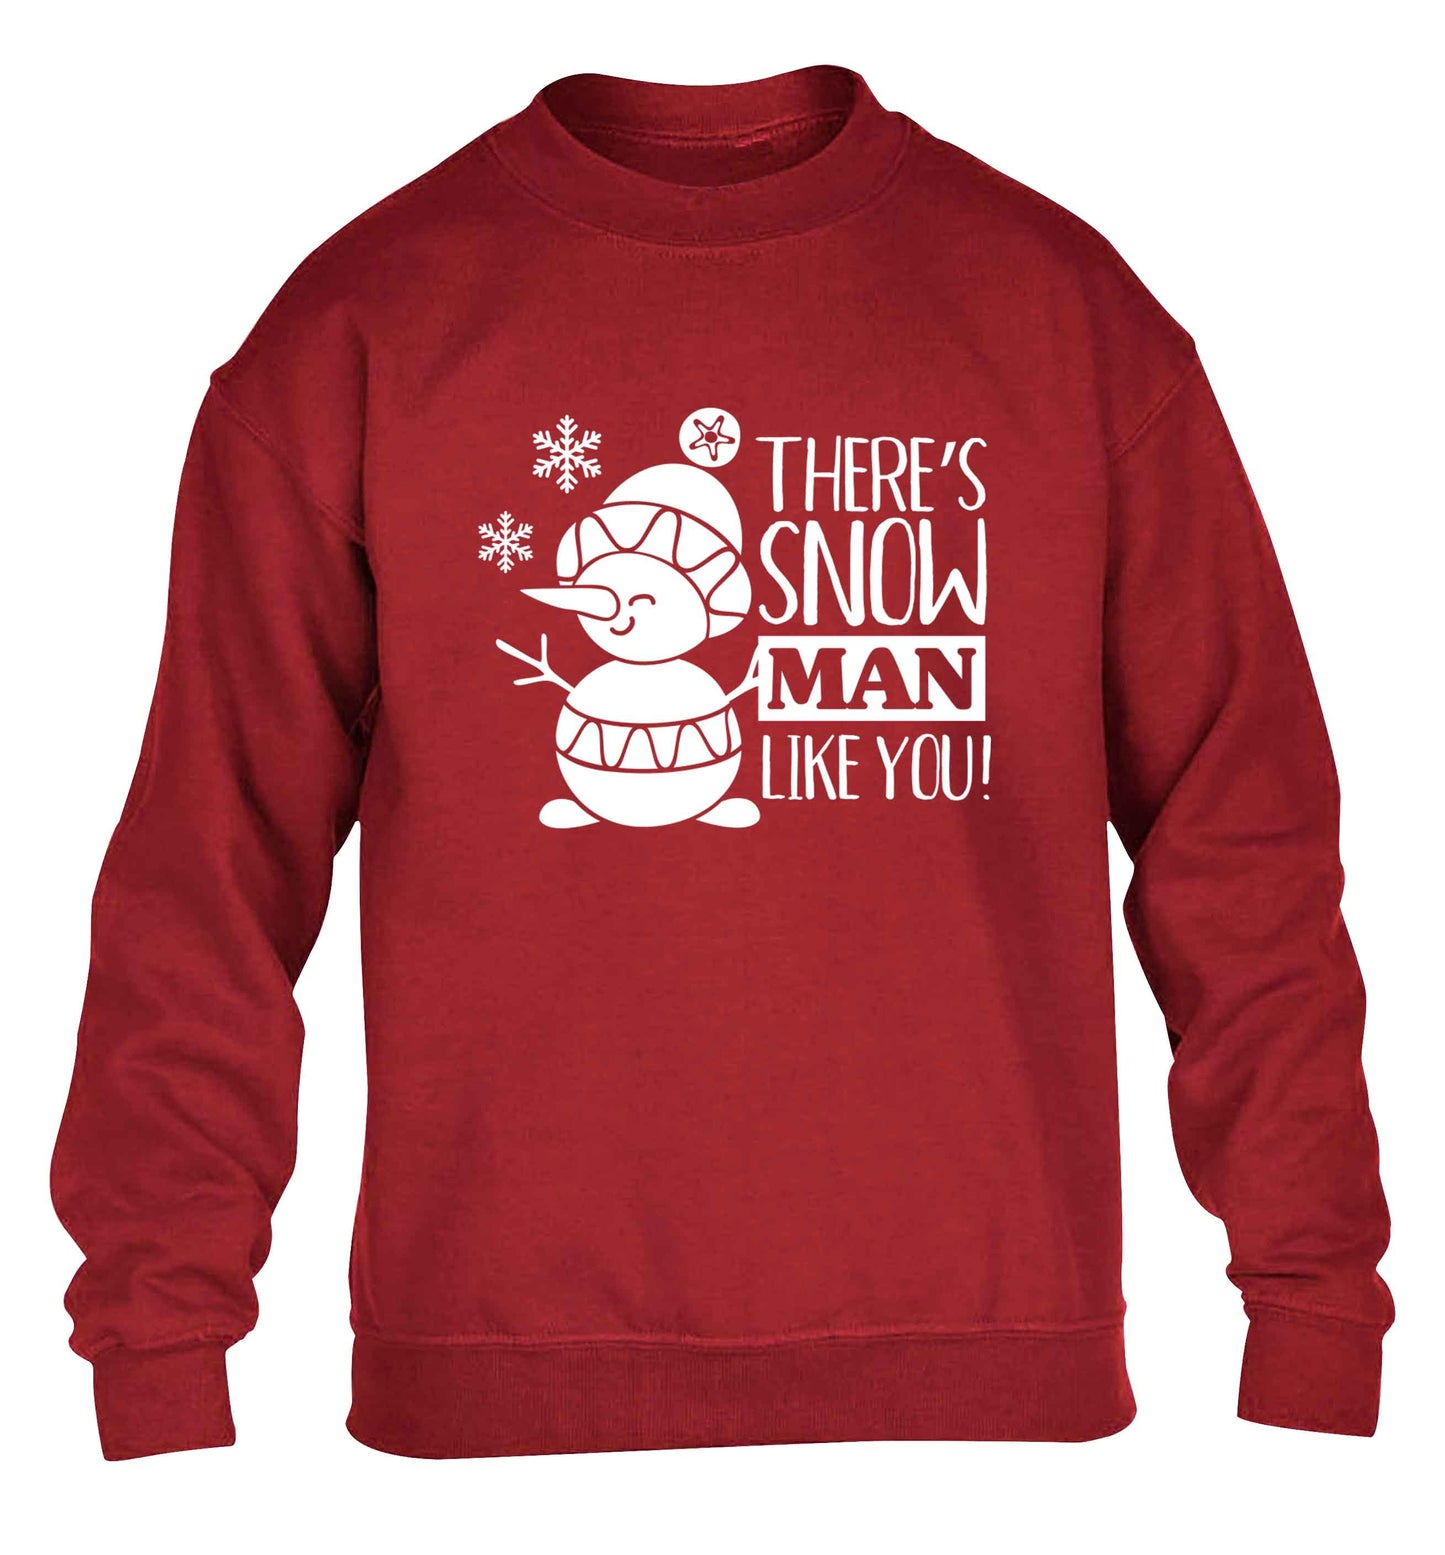 There's snow man like you children's grey sweater 12-13 Years